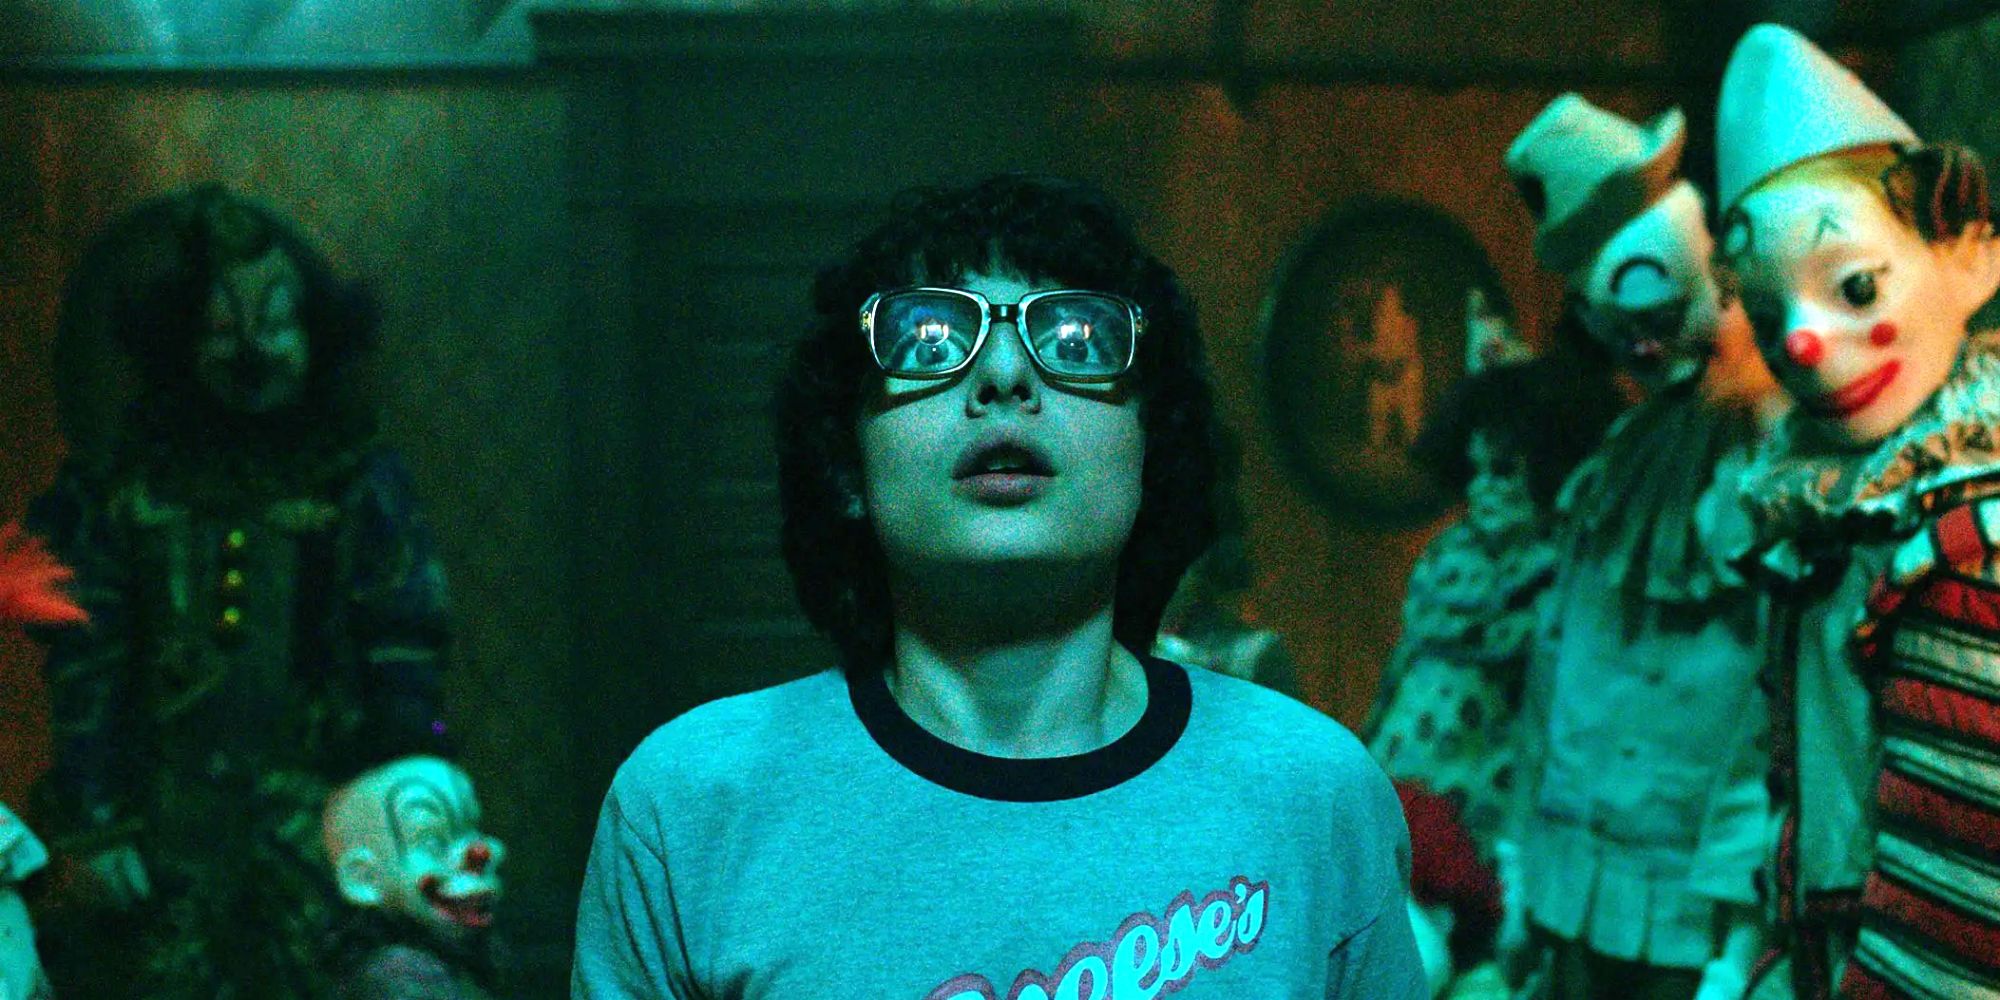 IT 2017 Finn Wolfhard as Richie Tozier in the Clown Room